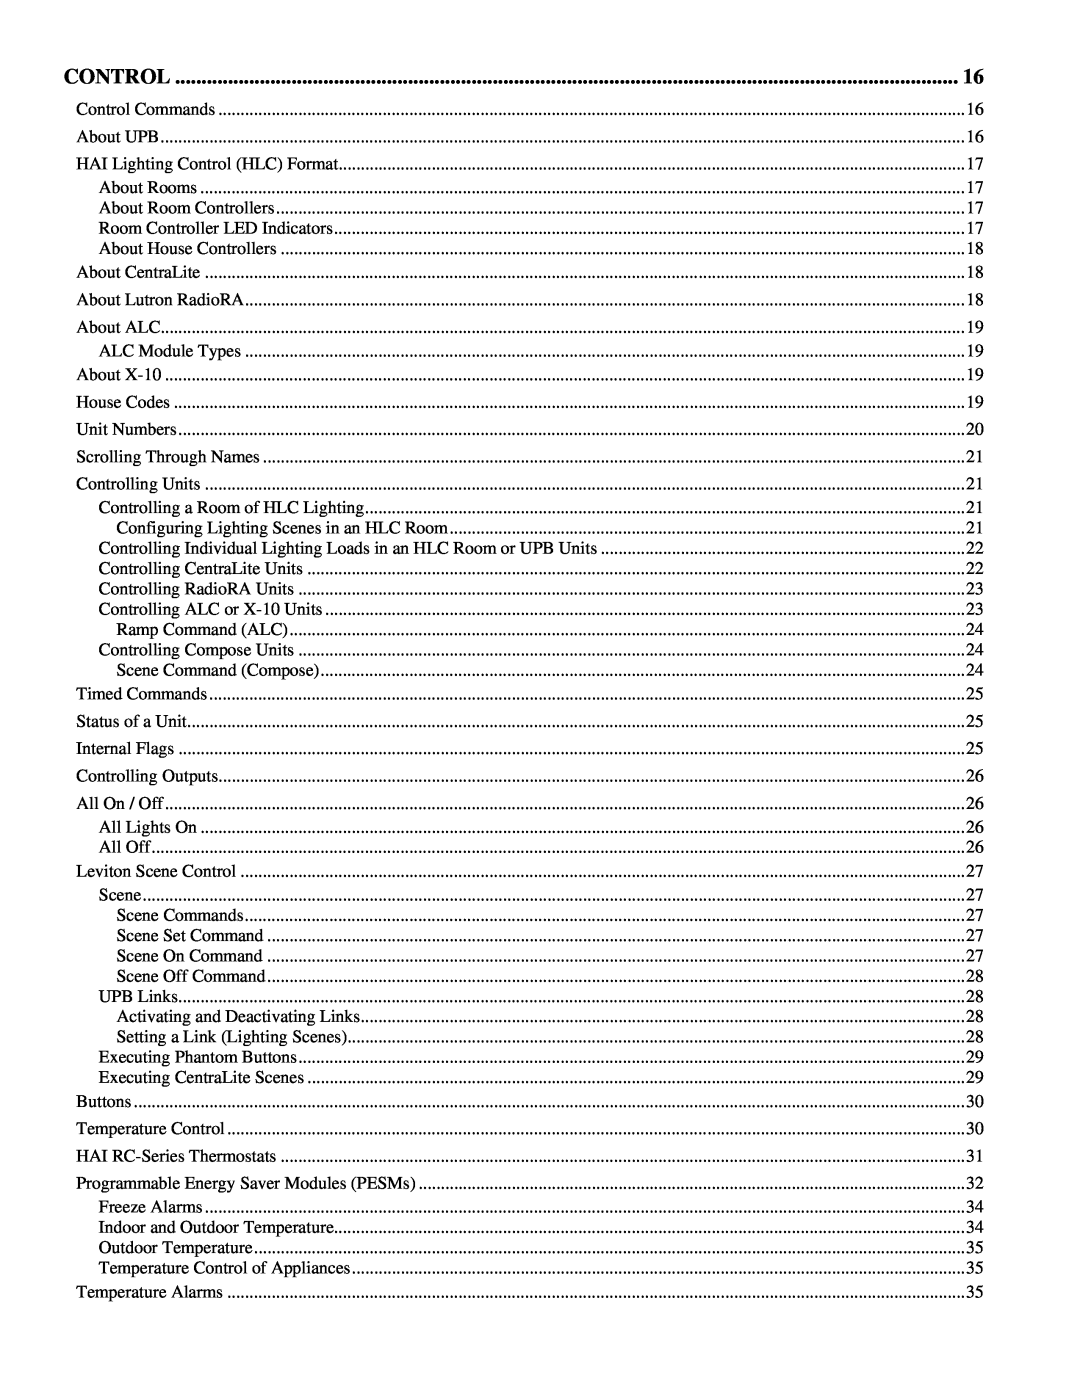 Home Automation OmniPro II owner manual Control 